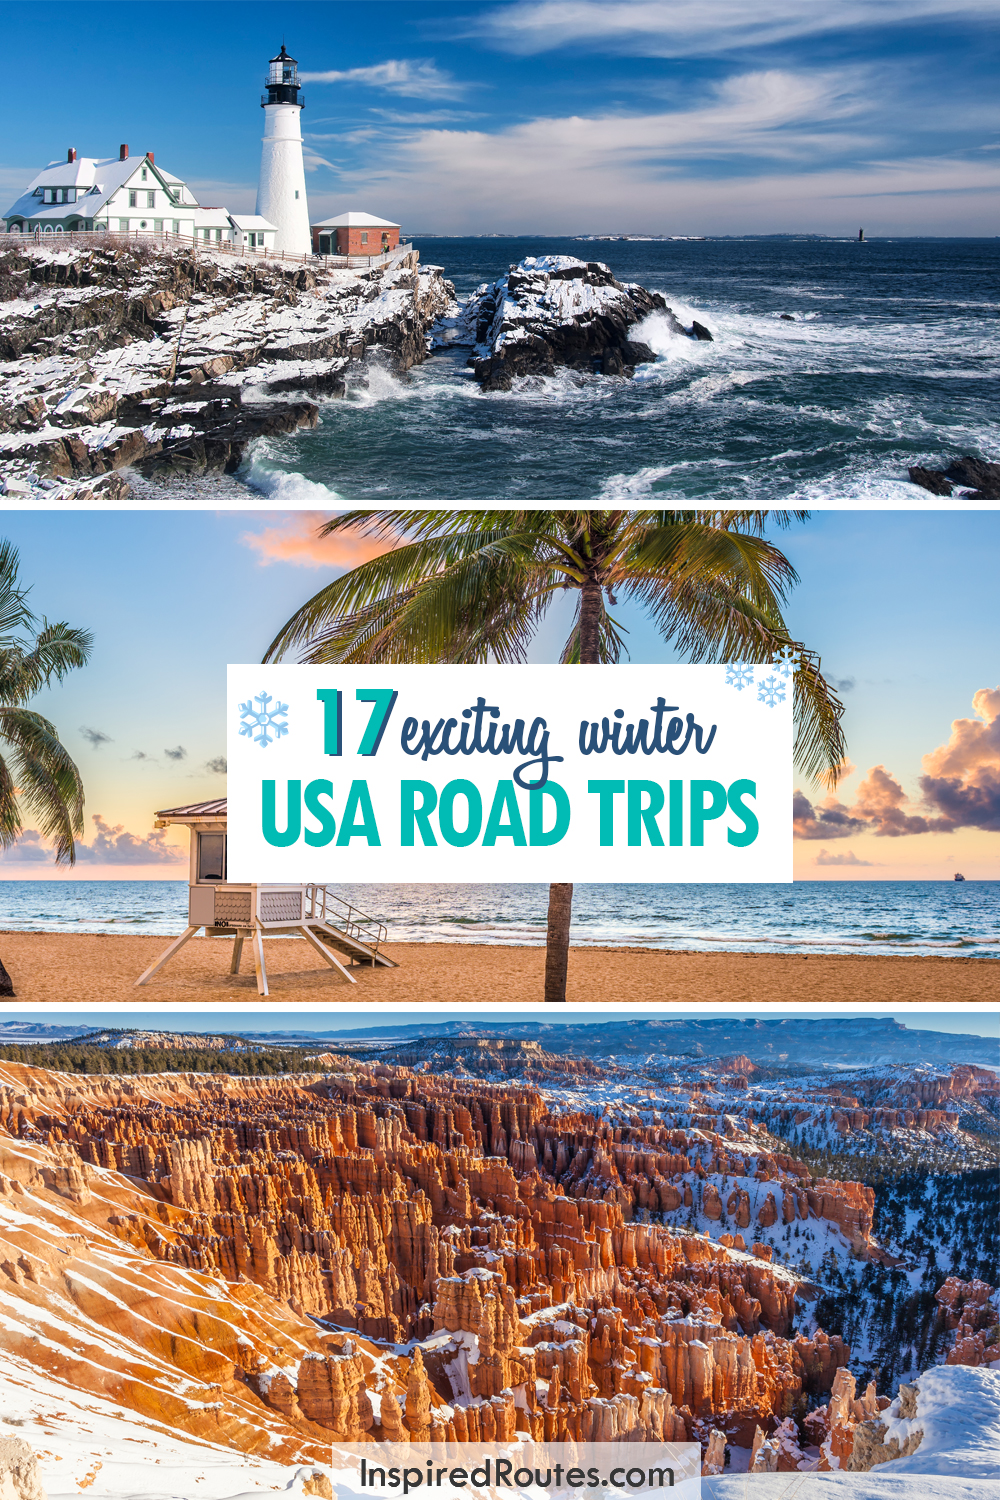 17 exciting winter USA road trips with 3 photos of snowy and beach destinations